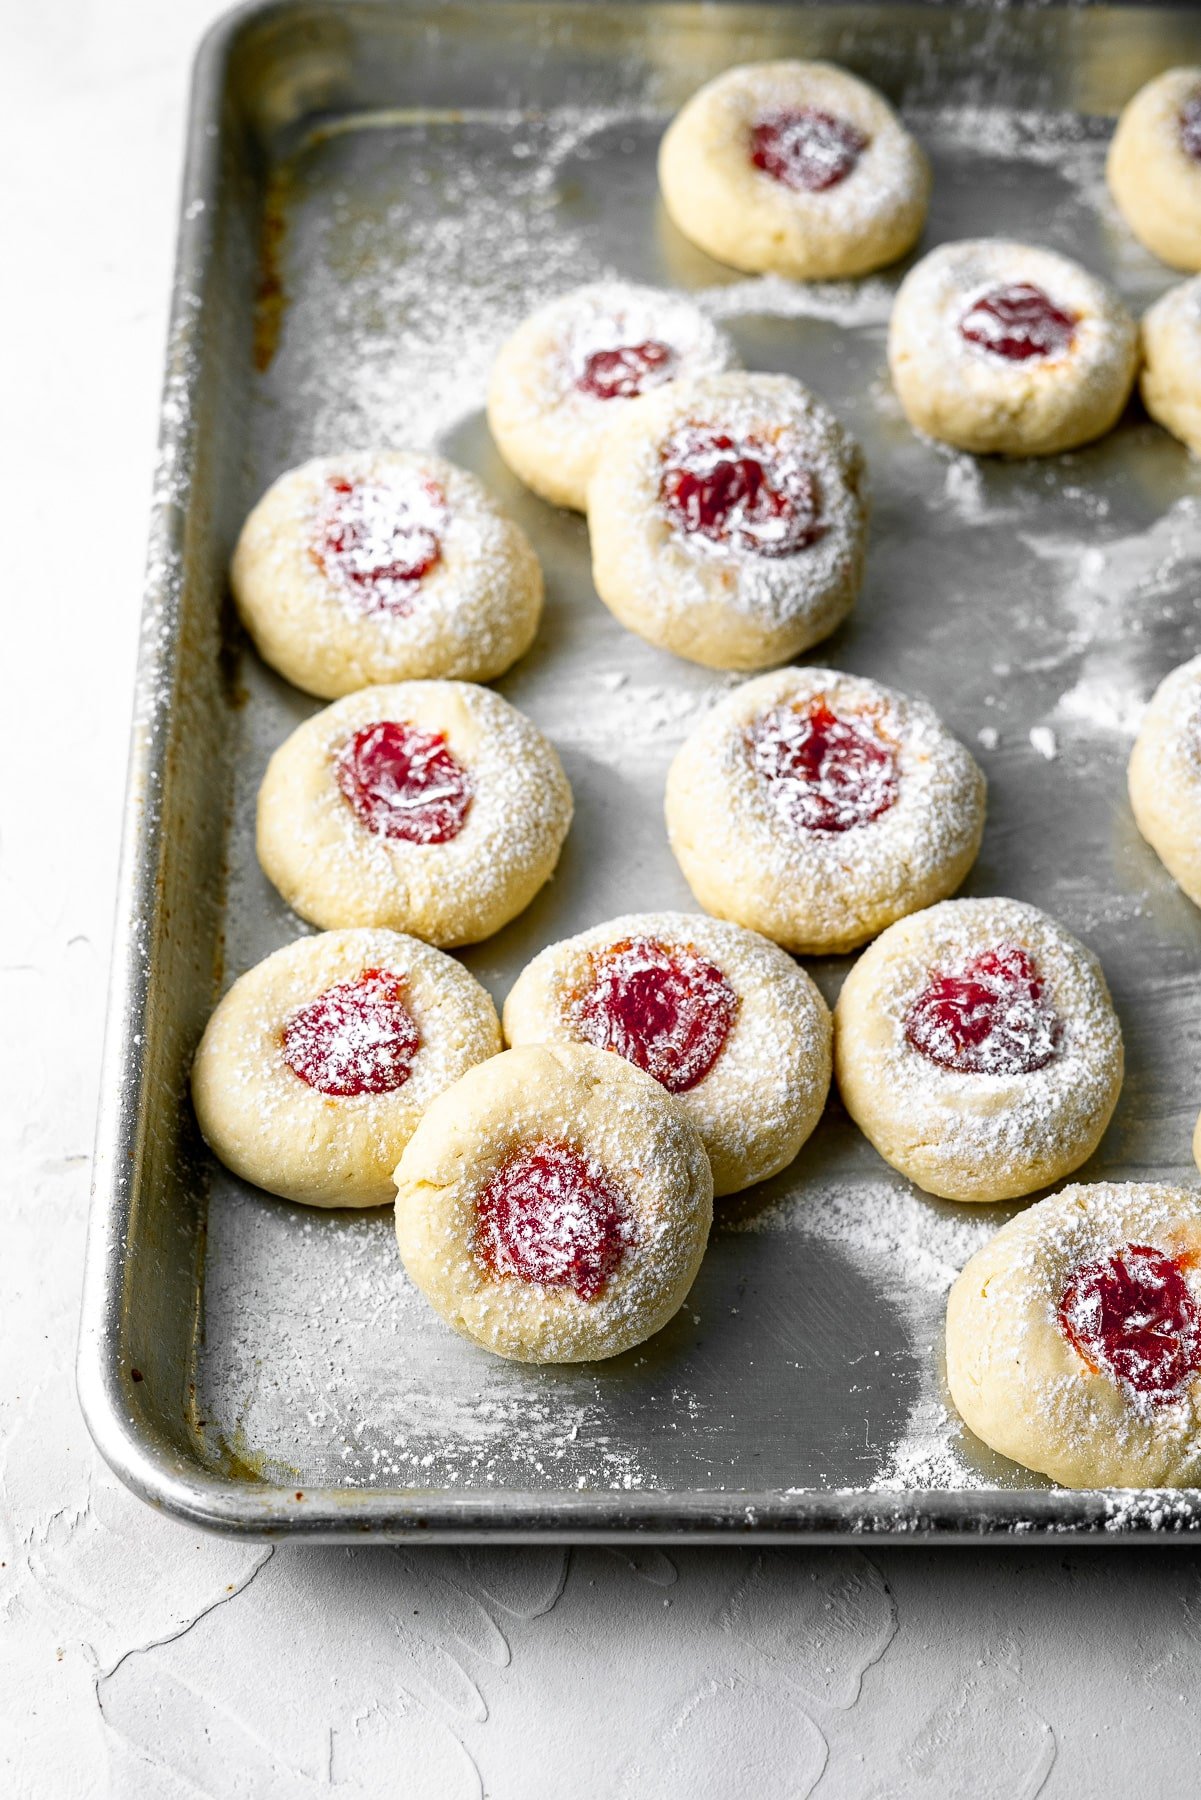 Guava Cream Cheese Cookies in Sheet Pan at a 45 degree angle